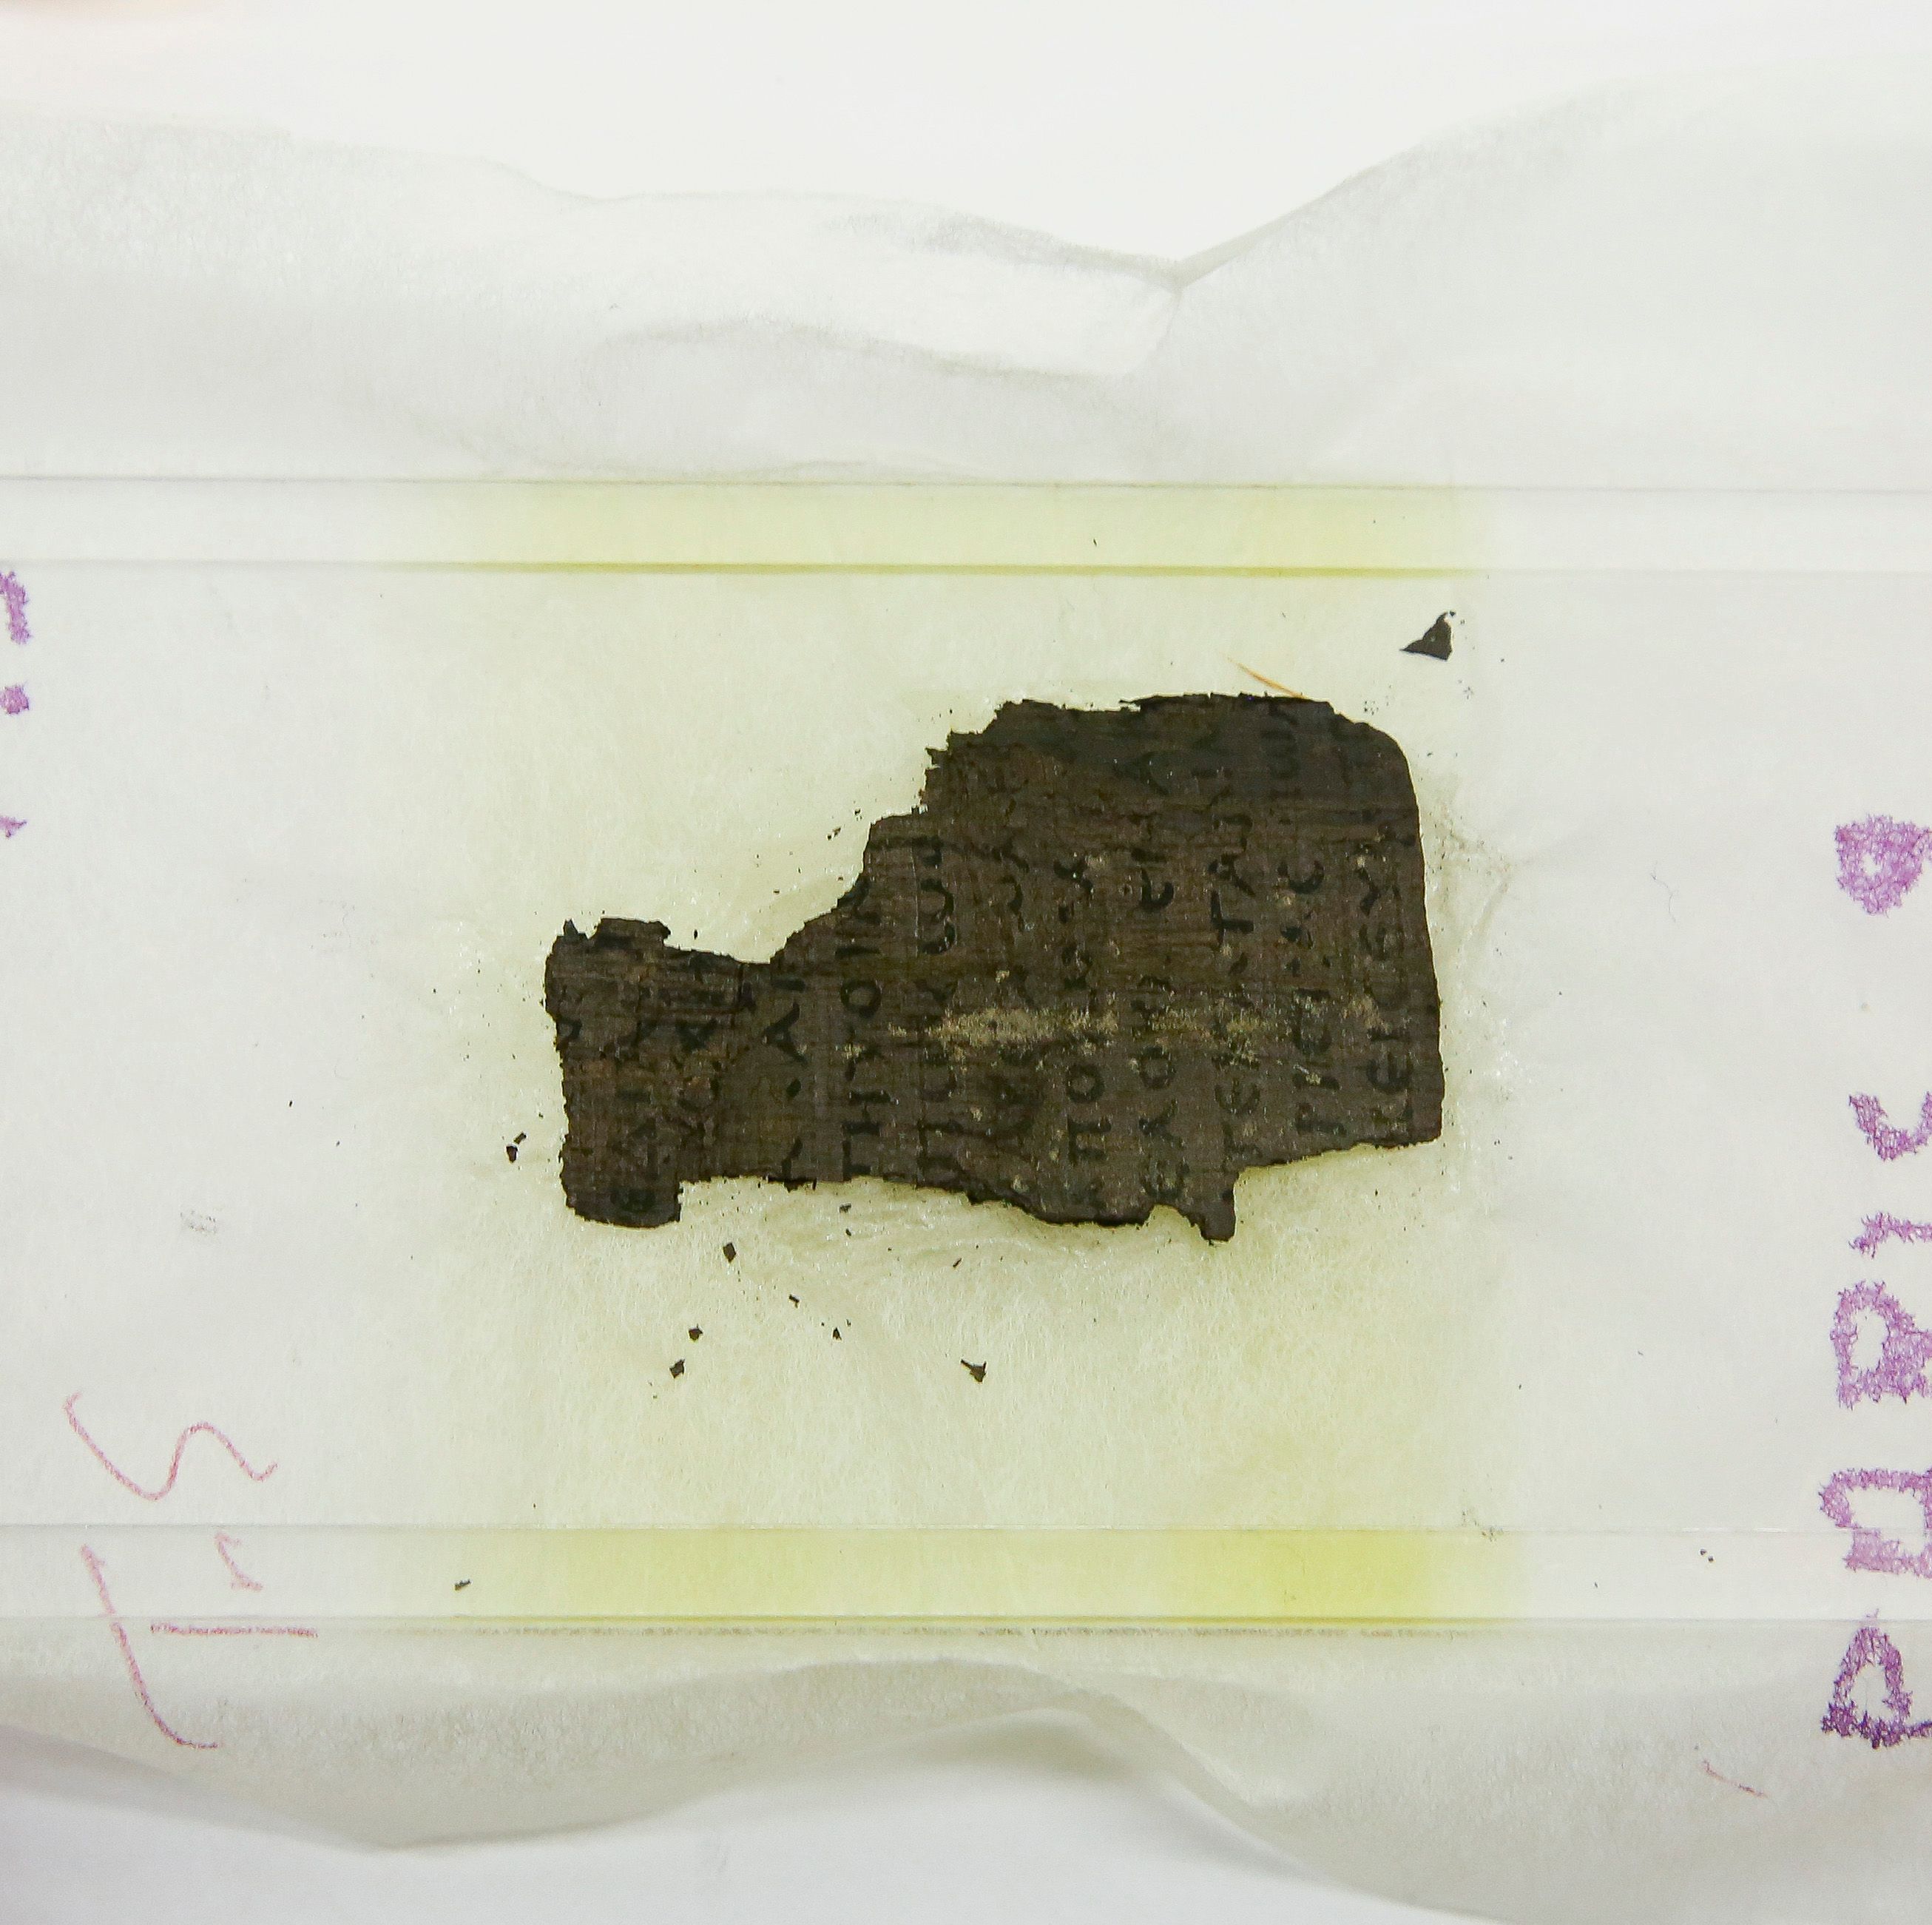 Mt. Vesuvius Carbonized This Ancient Scroll. Now, We Can Finally Read the First Word.